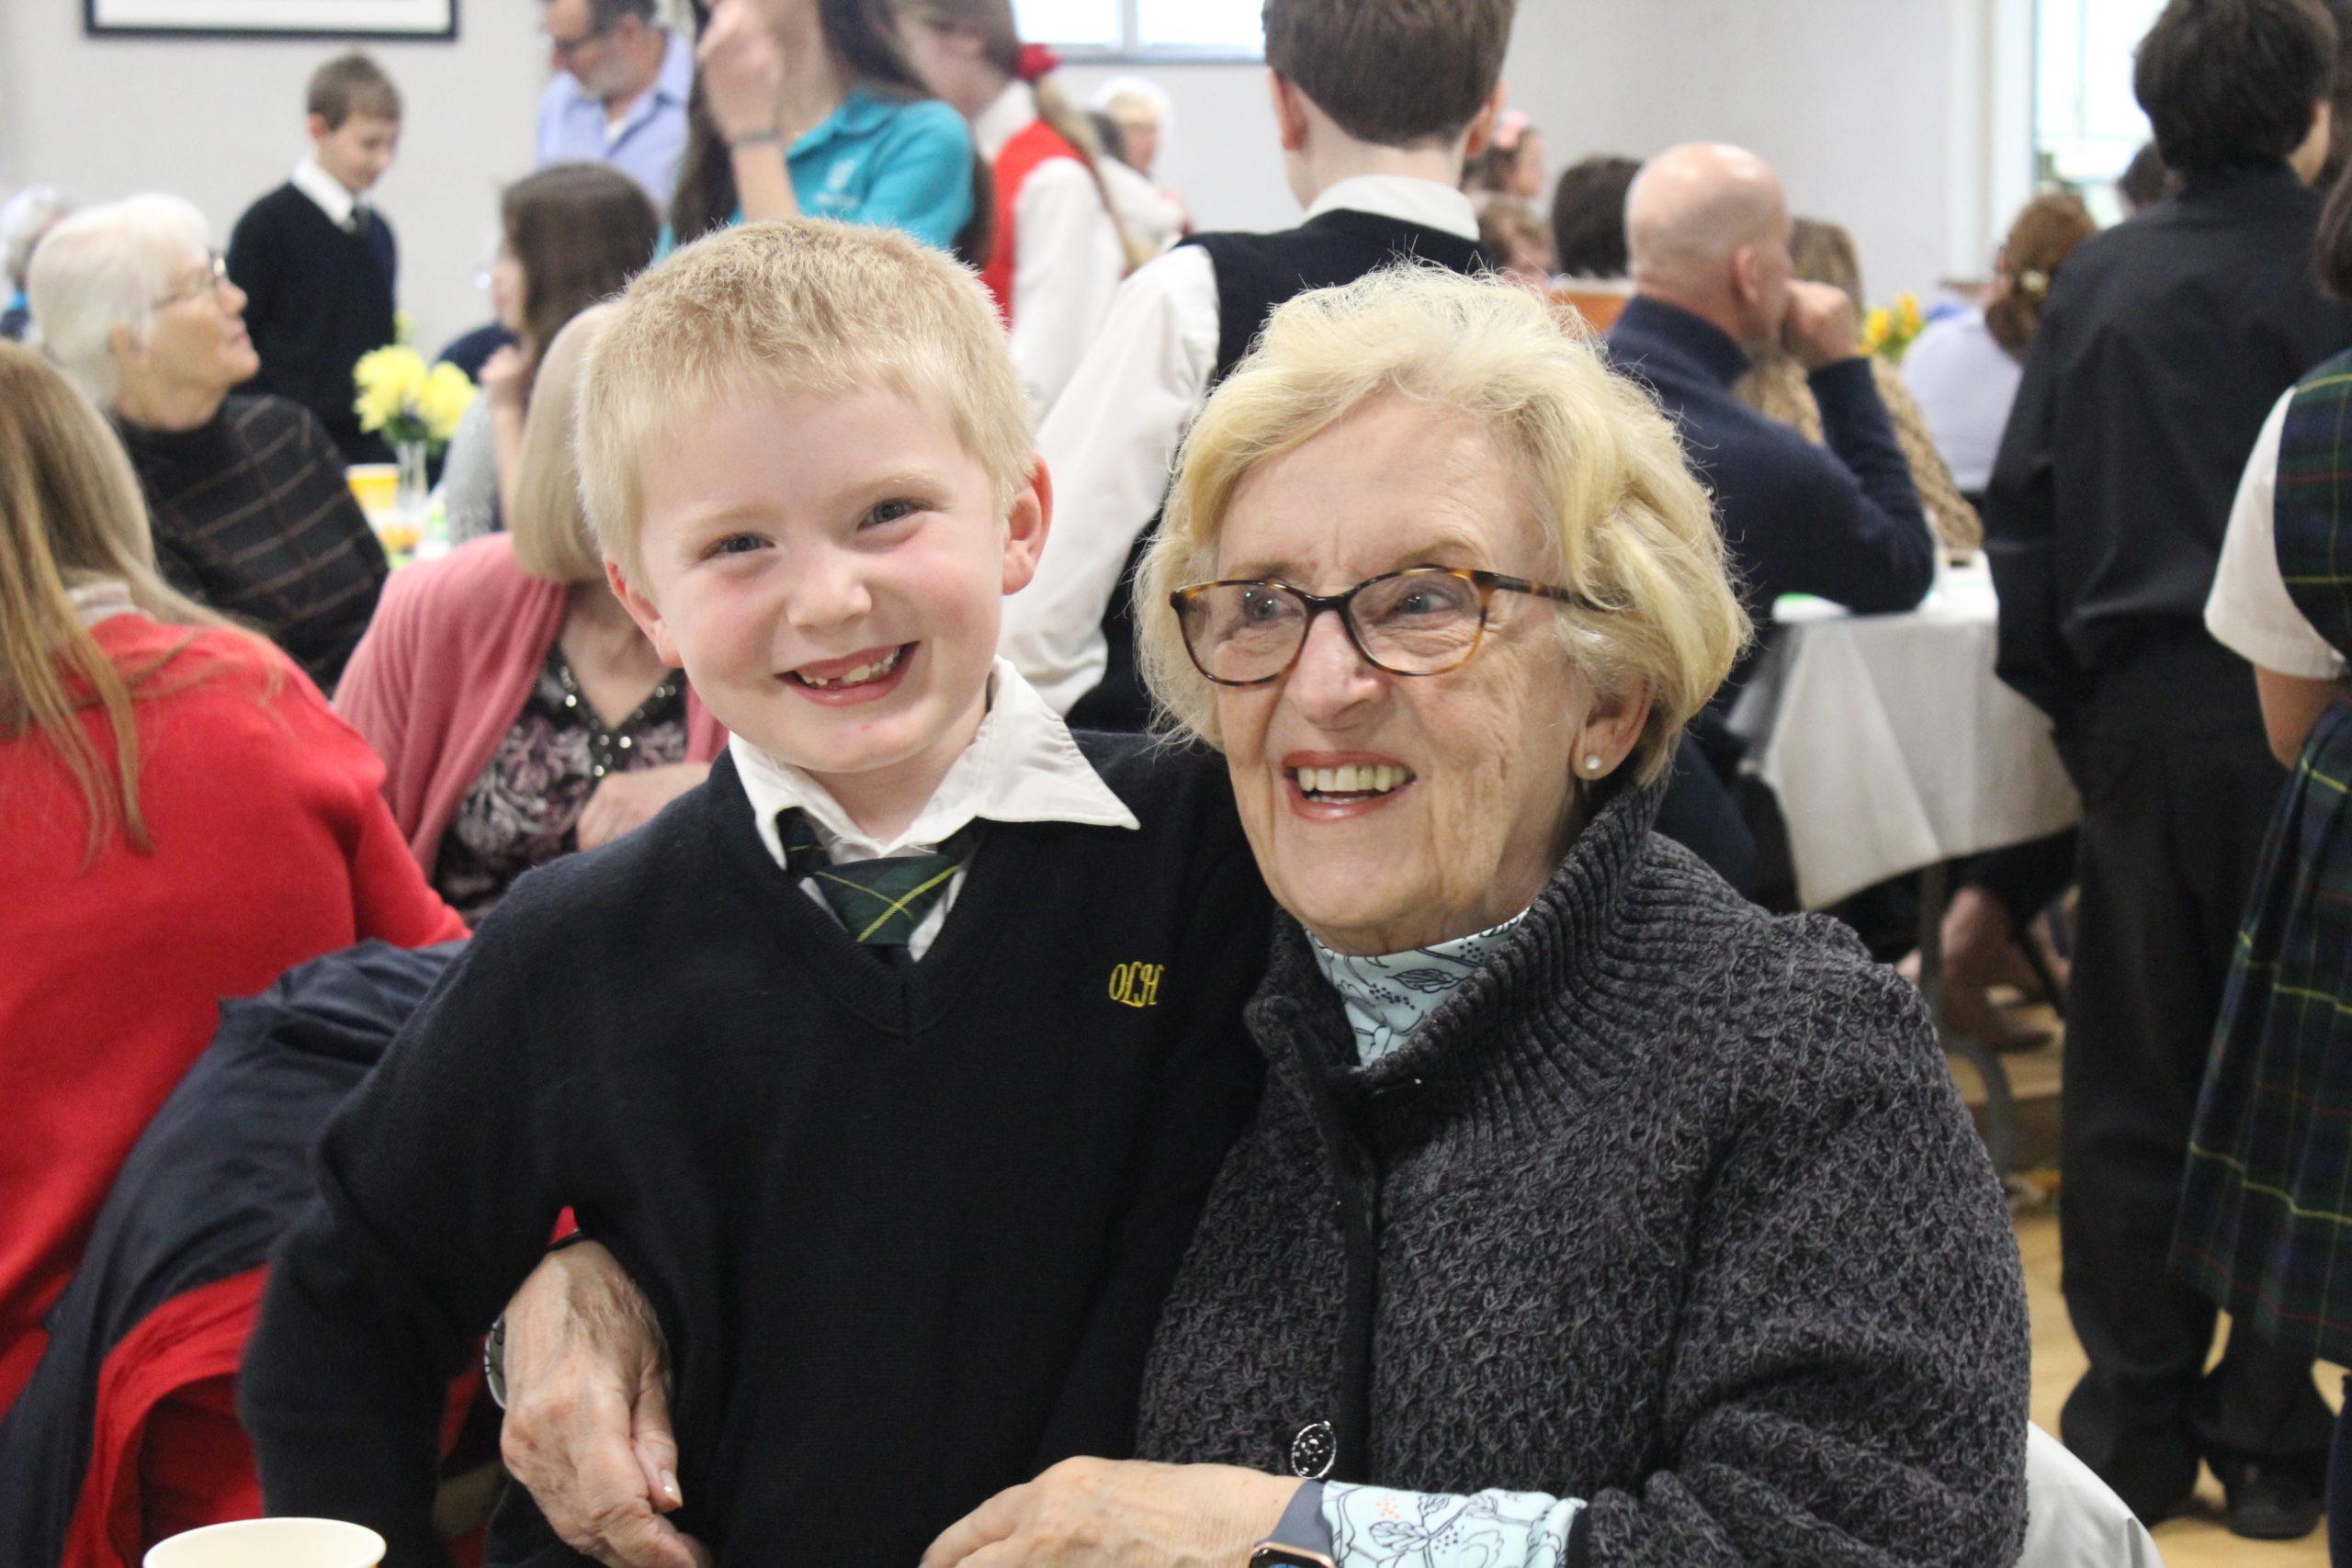 Our Lady of the Hamptons School invited students' grandparents for breakfast last weekend. At the event,  Sue McCulley shared a moment with her grandson, Quinn McCulley.